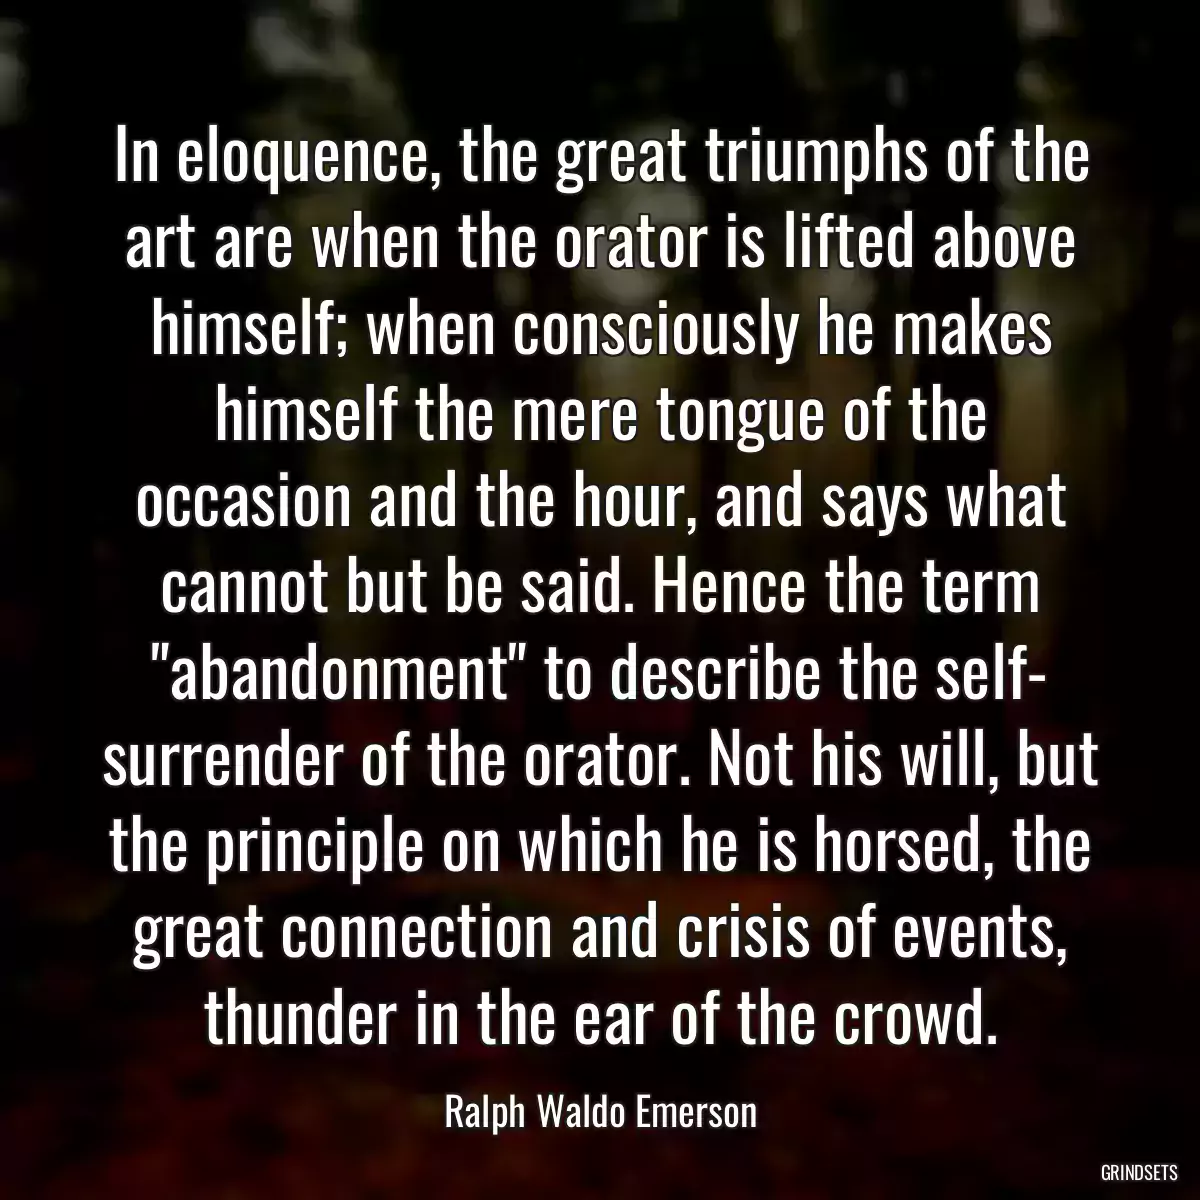 In eloquence, the great triumphs of the art are when the orator is lifted above himself; when consciously he makes himself the mere tongue of the occasion and the hour, and says what cannot but be said. Hence the term \